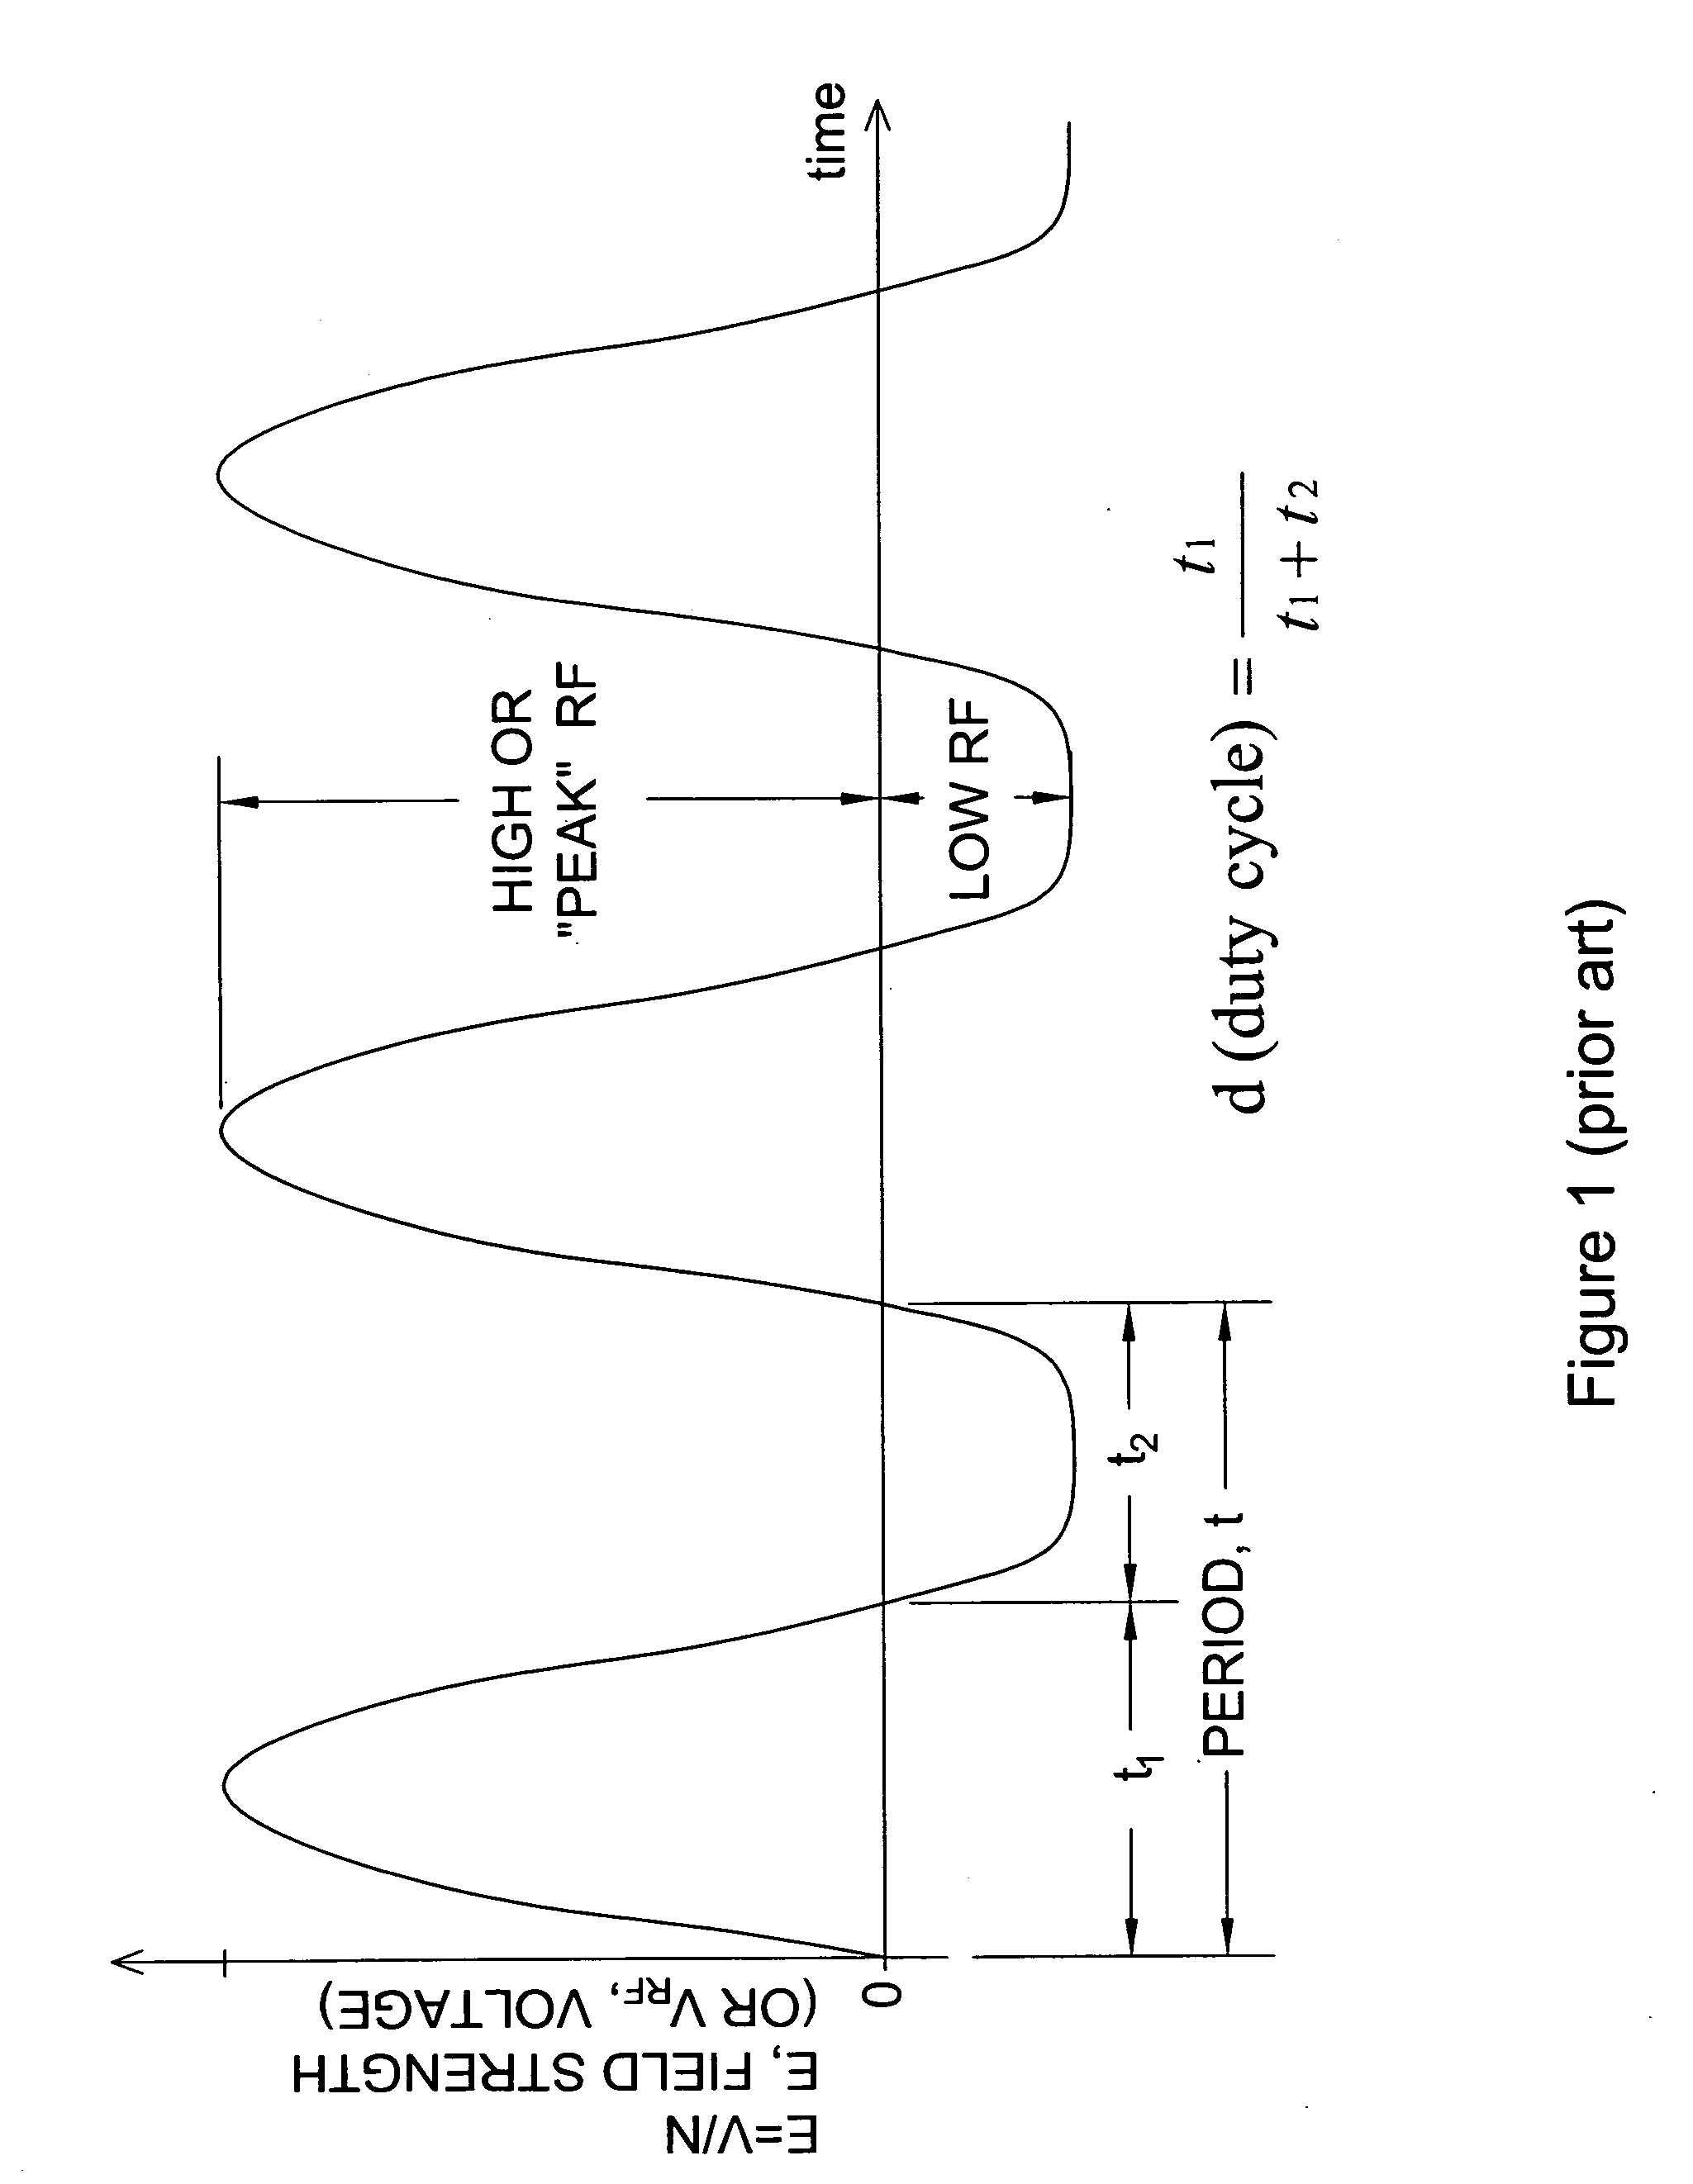 Mobility based apparatus and methods using dispersion characteristics, sample fragmentation, and/or pressure control to improve analysis of a sample